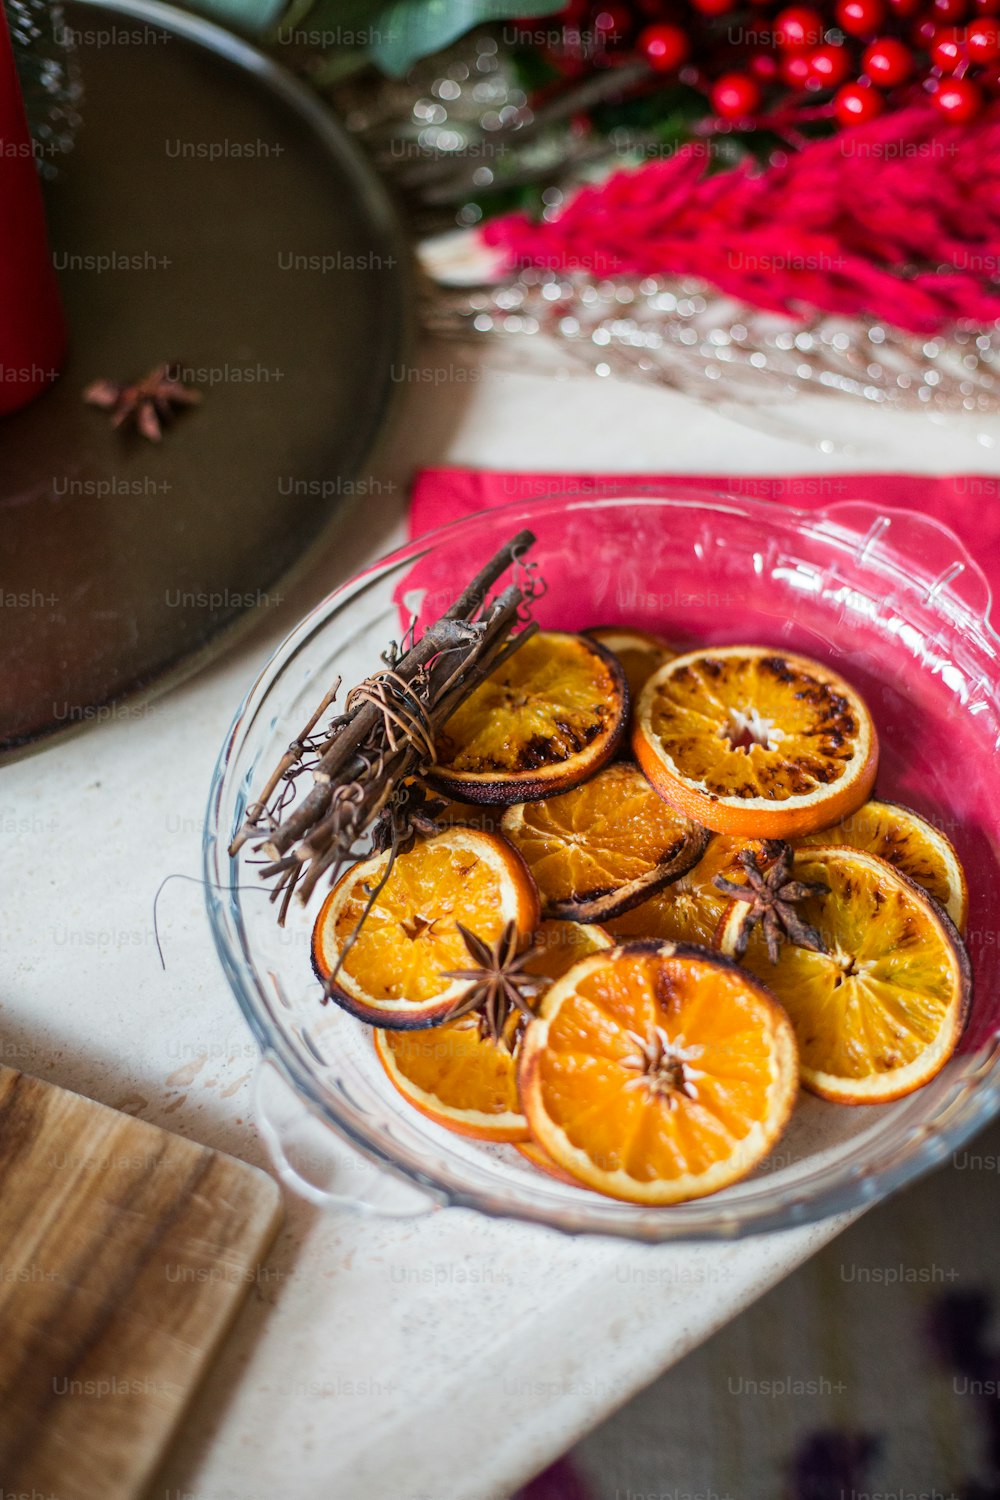 a glass bowl filled with oranges on top of a table